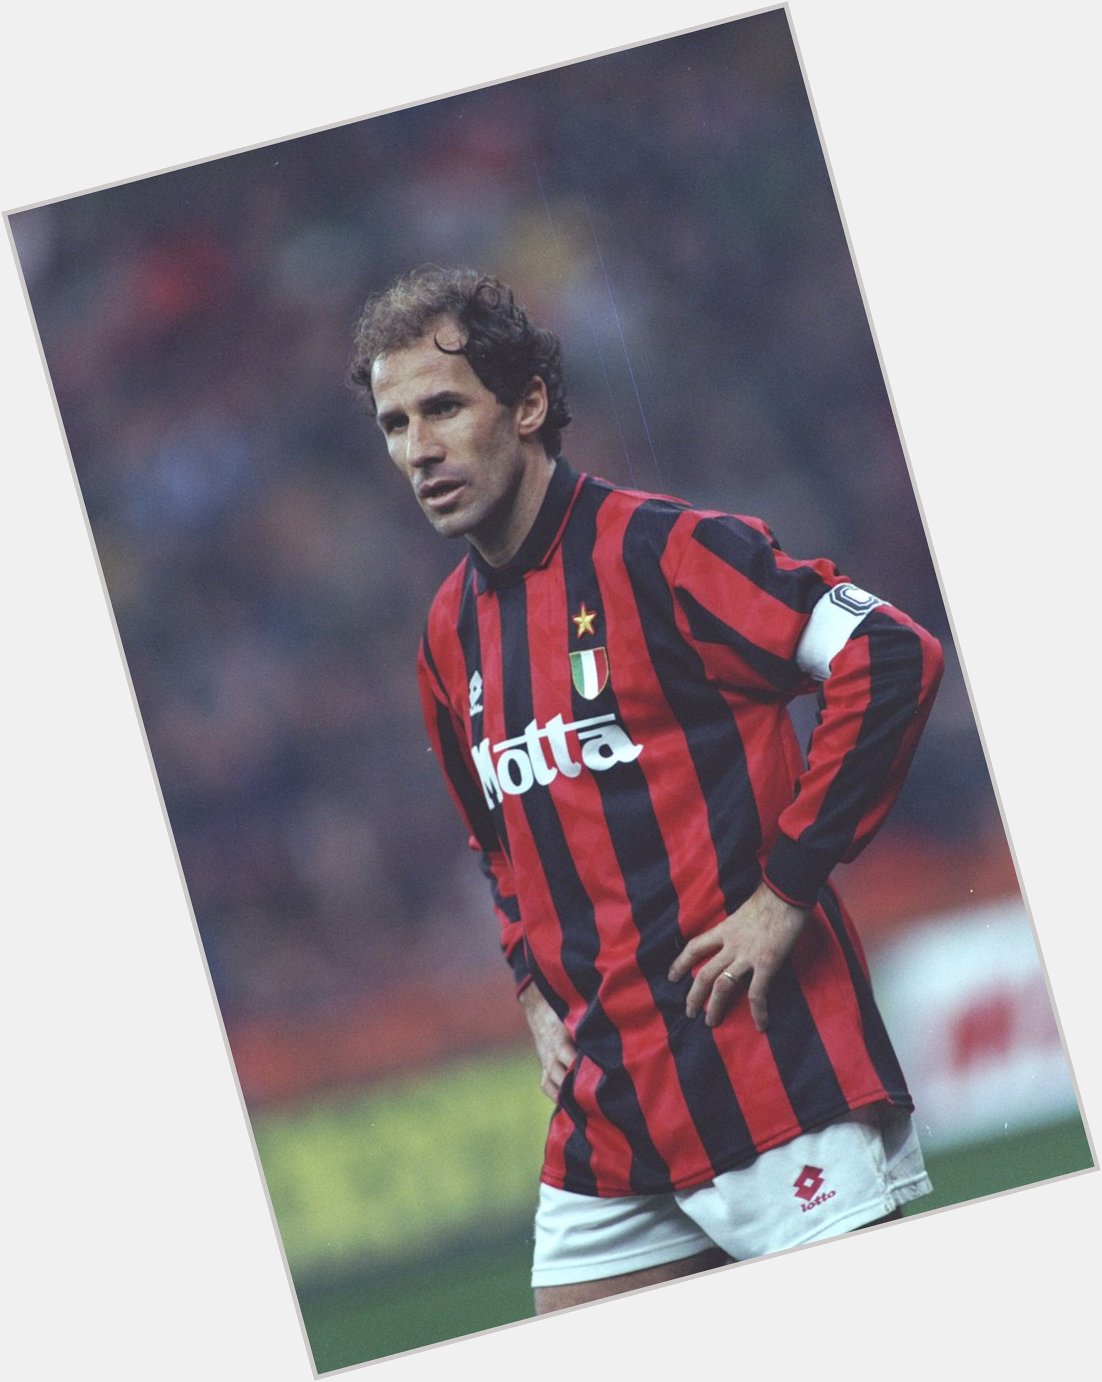 Happy birthday to a master in the art of defending, Franco Baresi.

Meet the great man this friday 